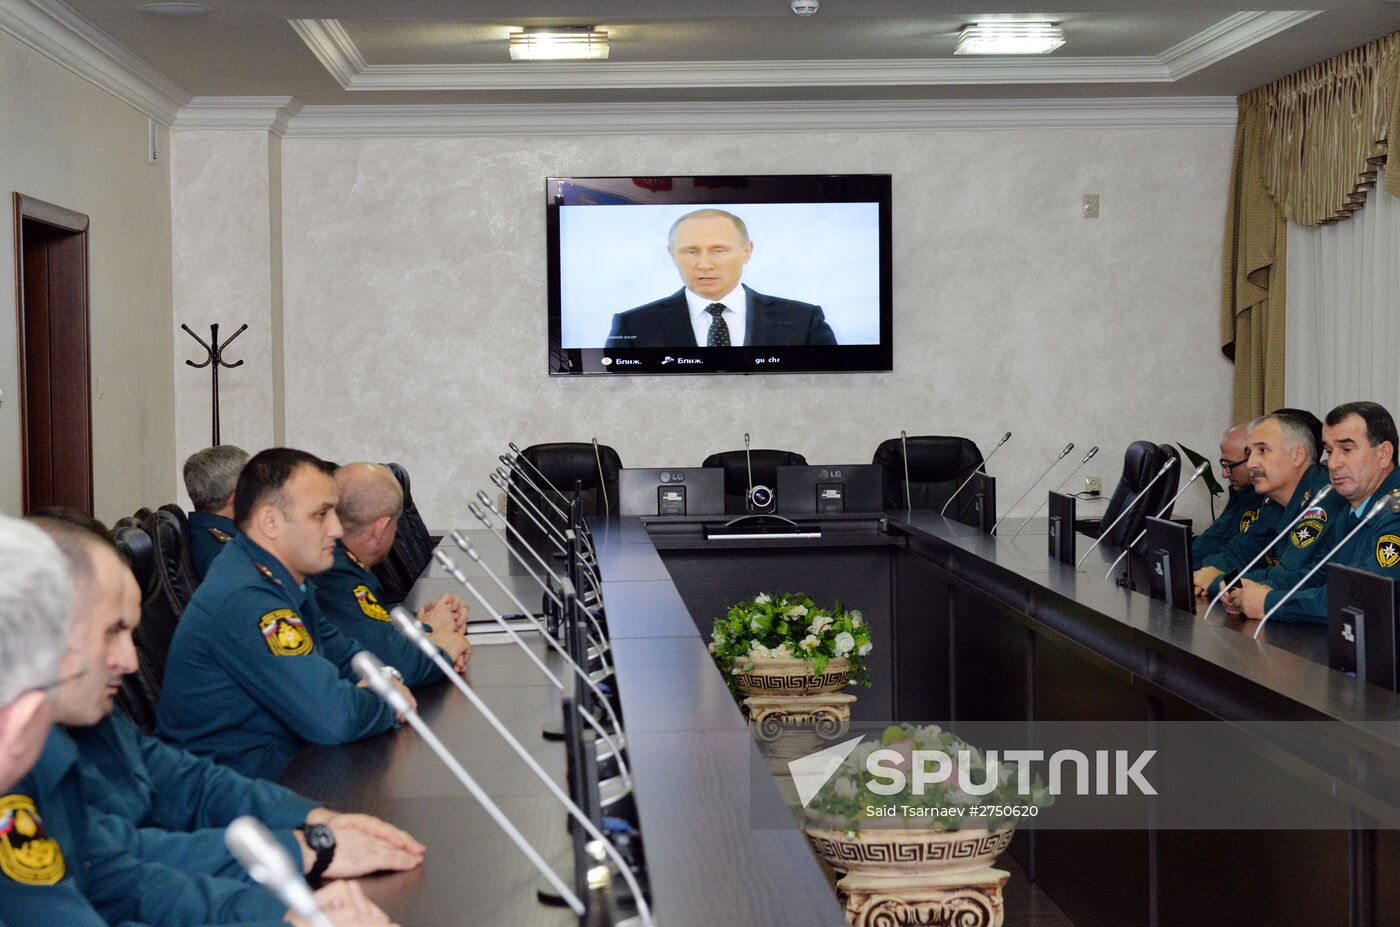 Broadcast of Vladimir Putin's Presidential Address to Federal Assembly